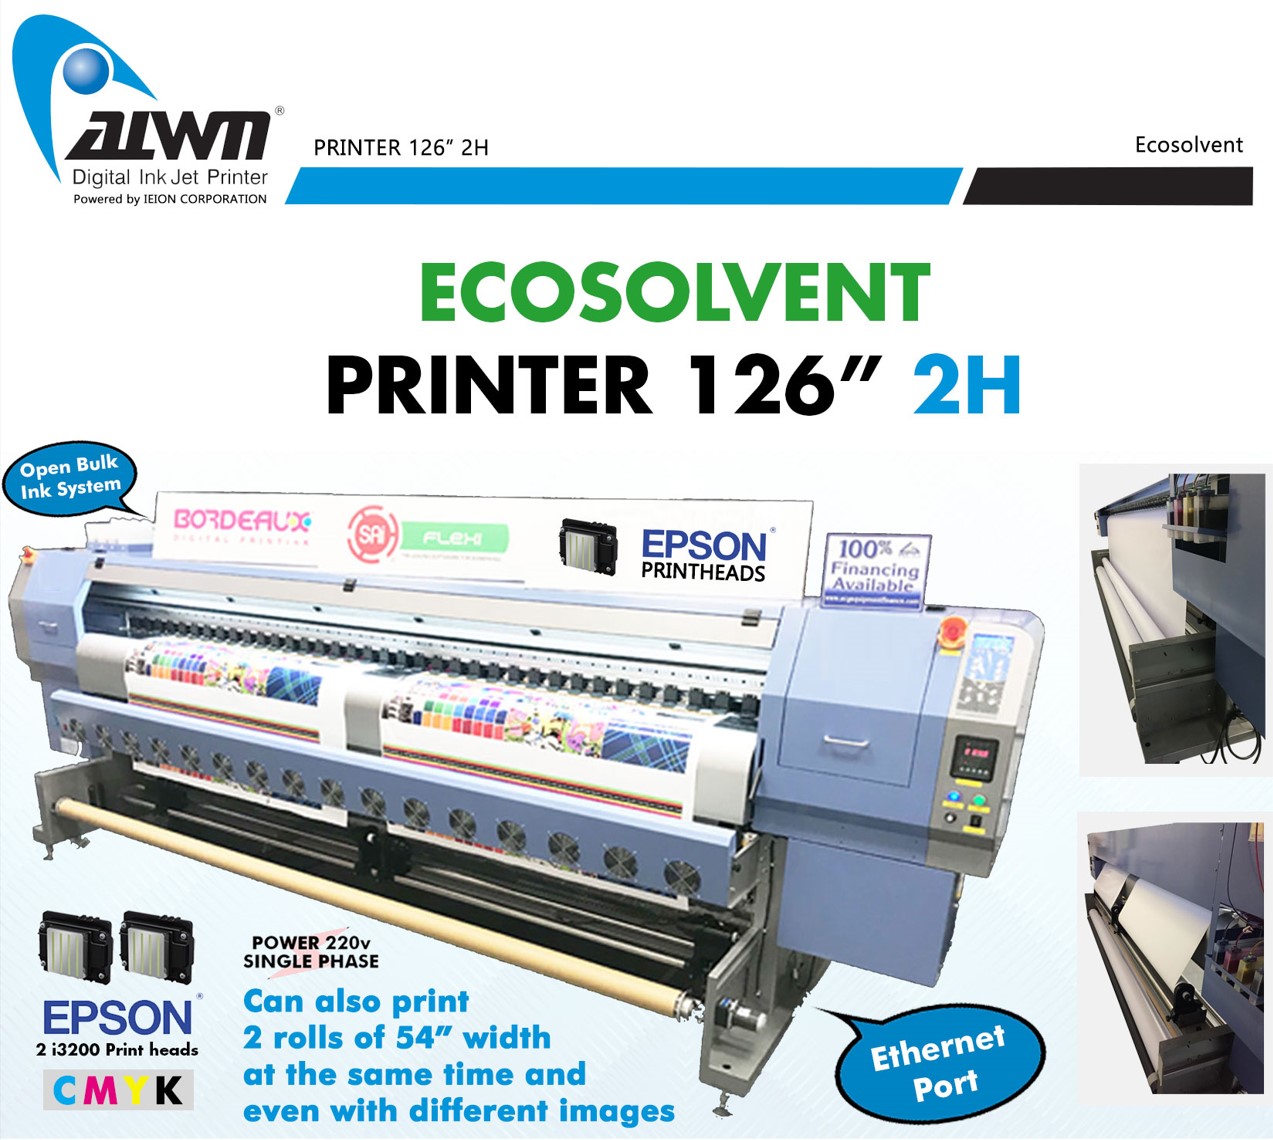 Allwin Ecosolvent or Sublimation Printer 126" 2H